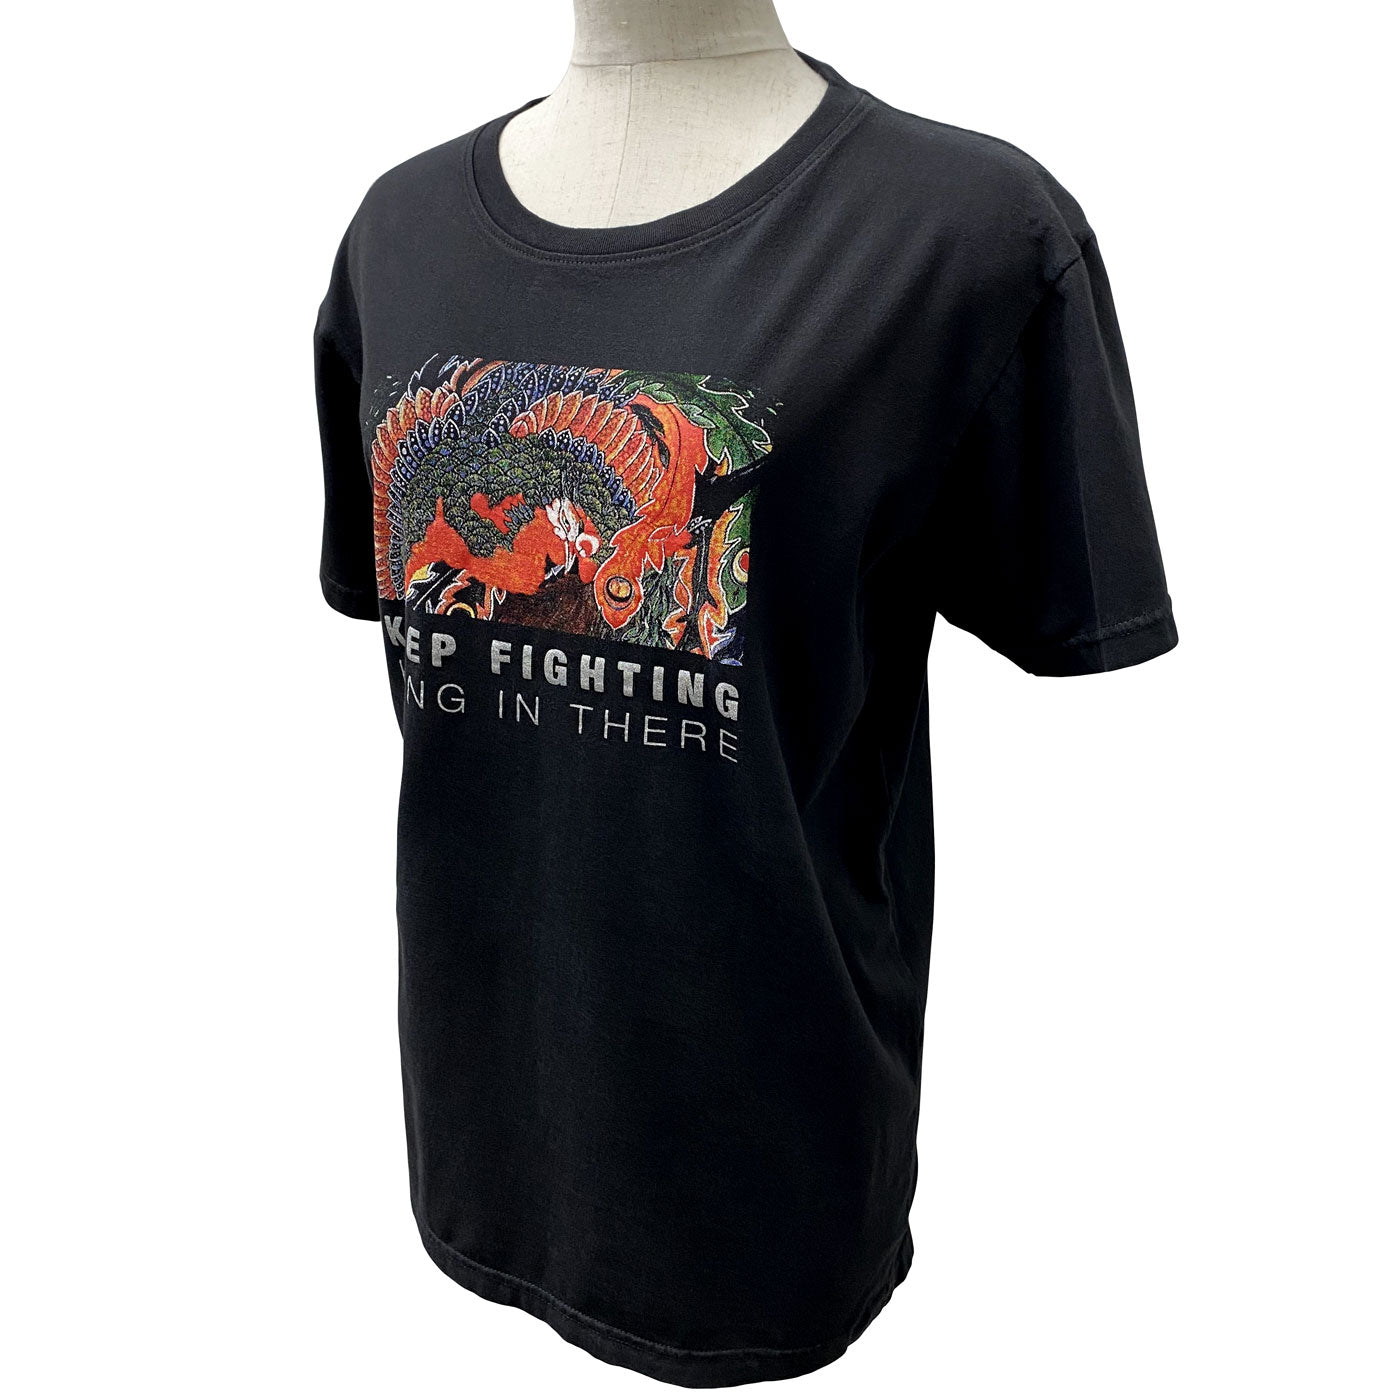 Disinfecting Cloth T Shirt Unisex 100% Cotton -Keep Fighting- Black Made in Japan FORTUNA Tokyo